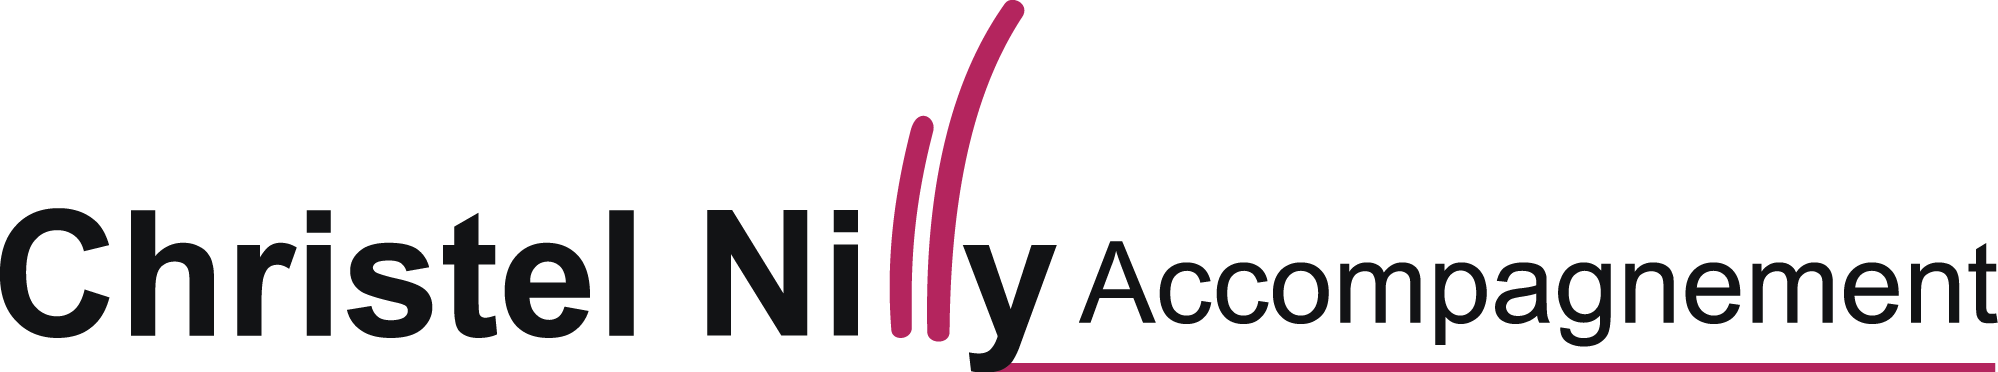 Formation et coaching professionnel - Christel Nilly Accompagnement